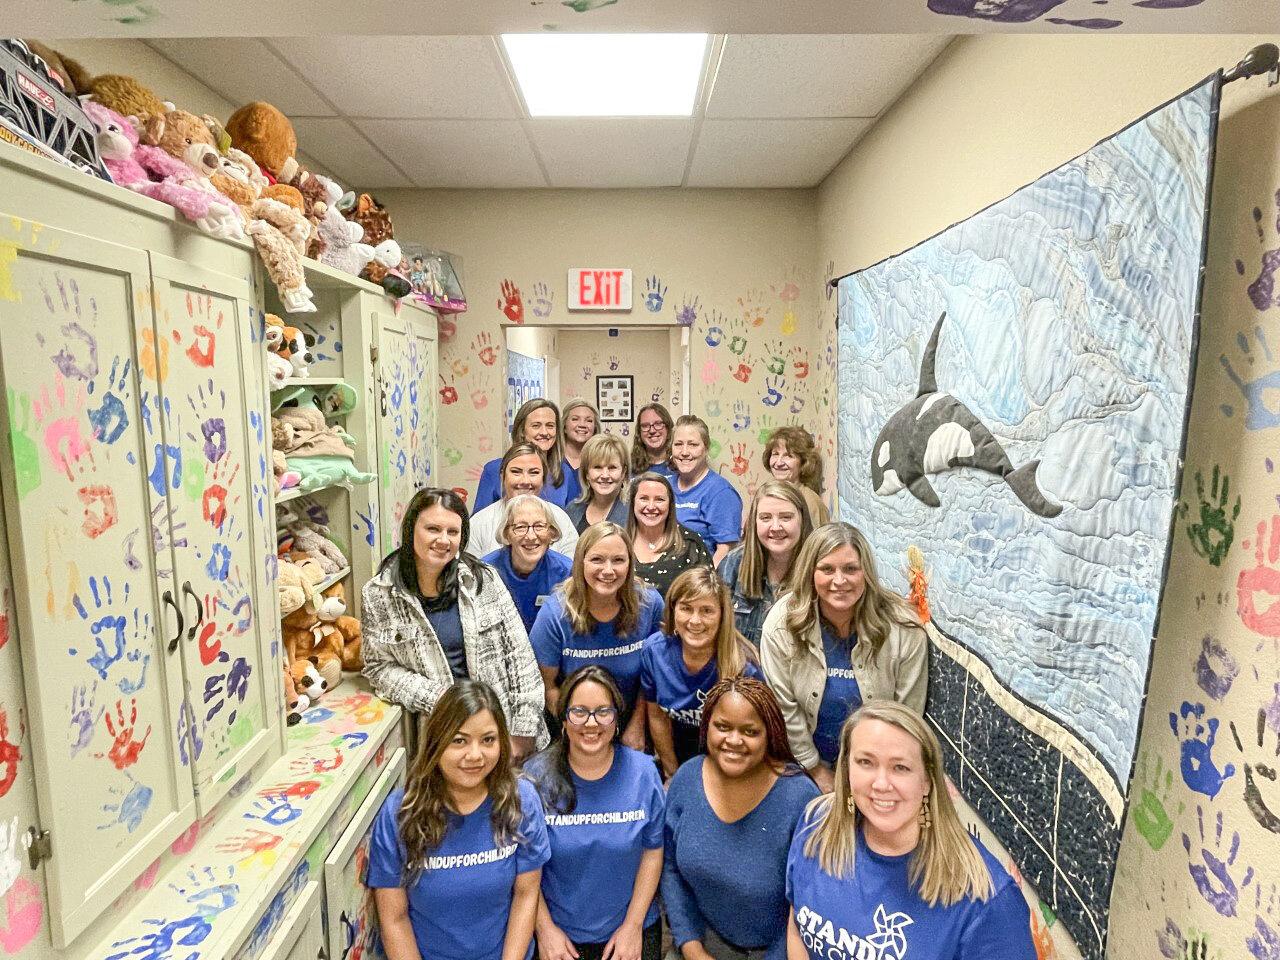 Staff members of the Paluxy River Children’s Advocacy Center wear blue on Jan. 11, in recognition of National Human Trafficking Awareness Day.